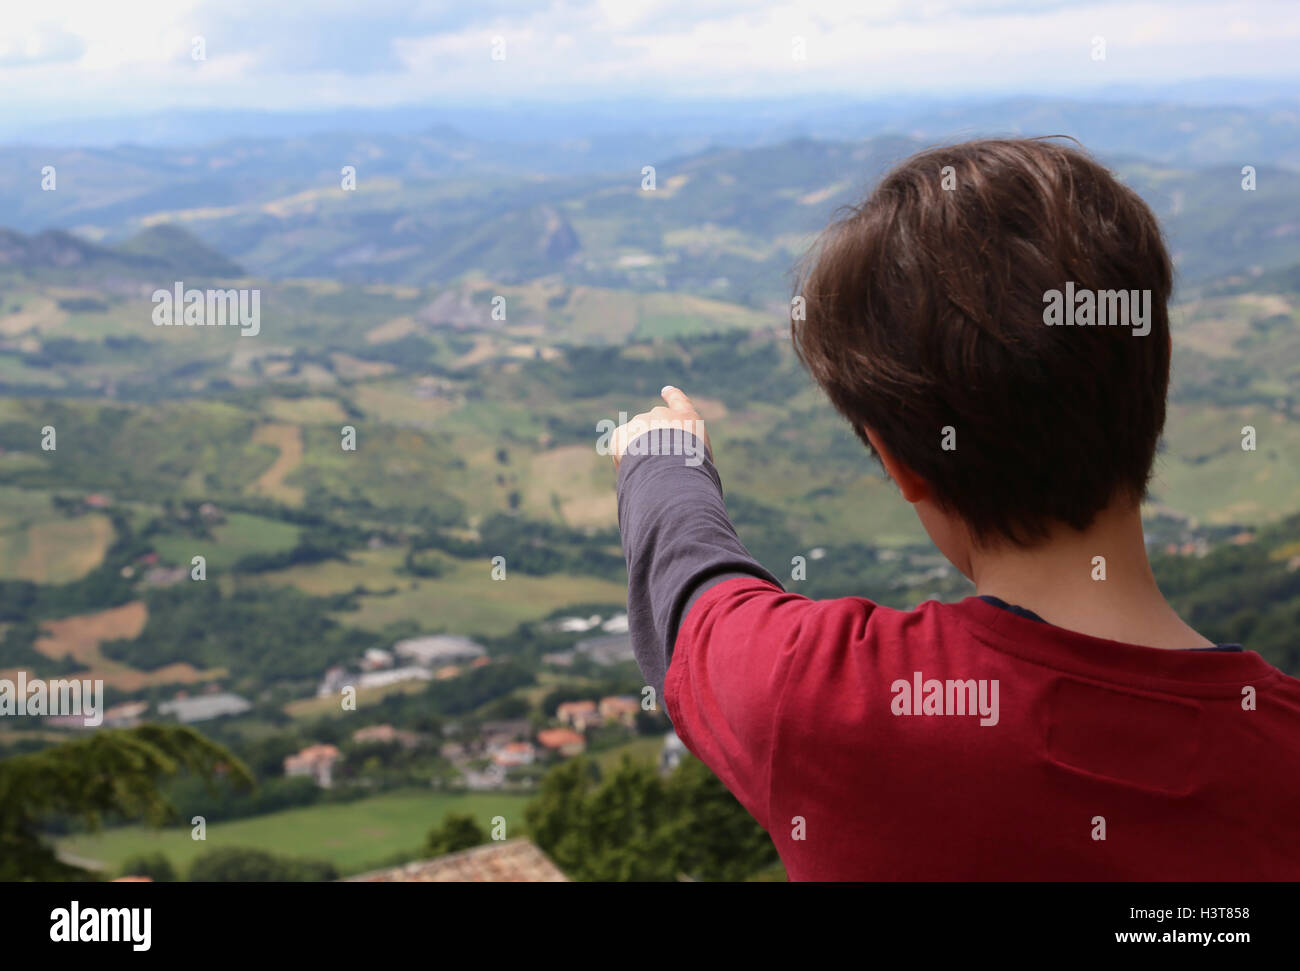 young boy shows the beautiful landscape of the Apennines Mountains in Italy Stock Photo